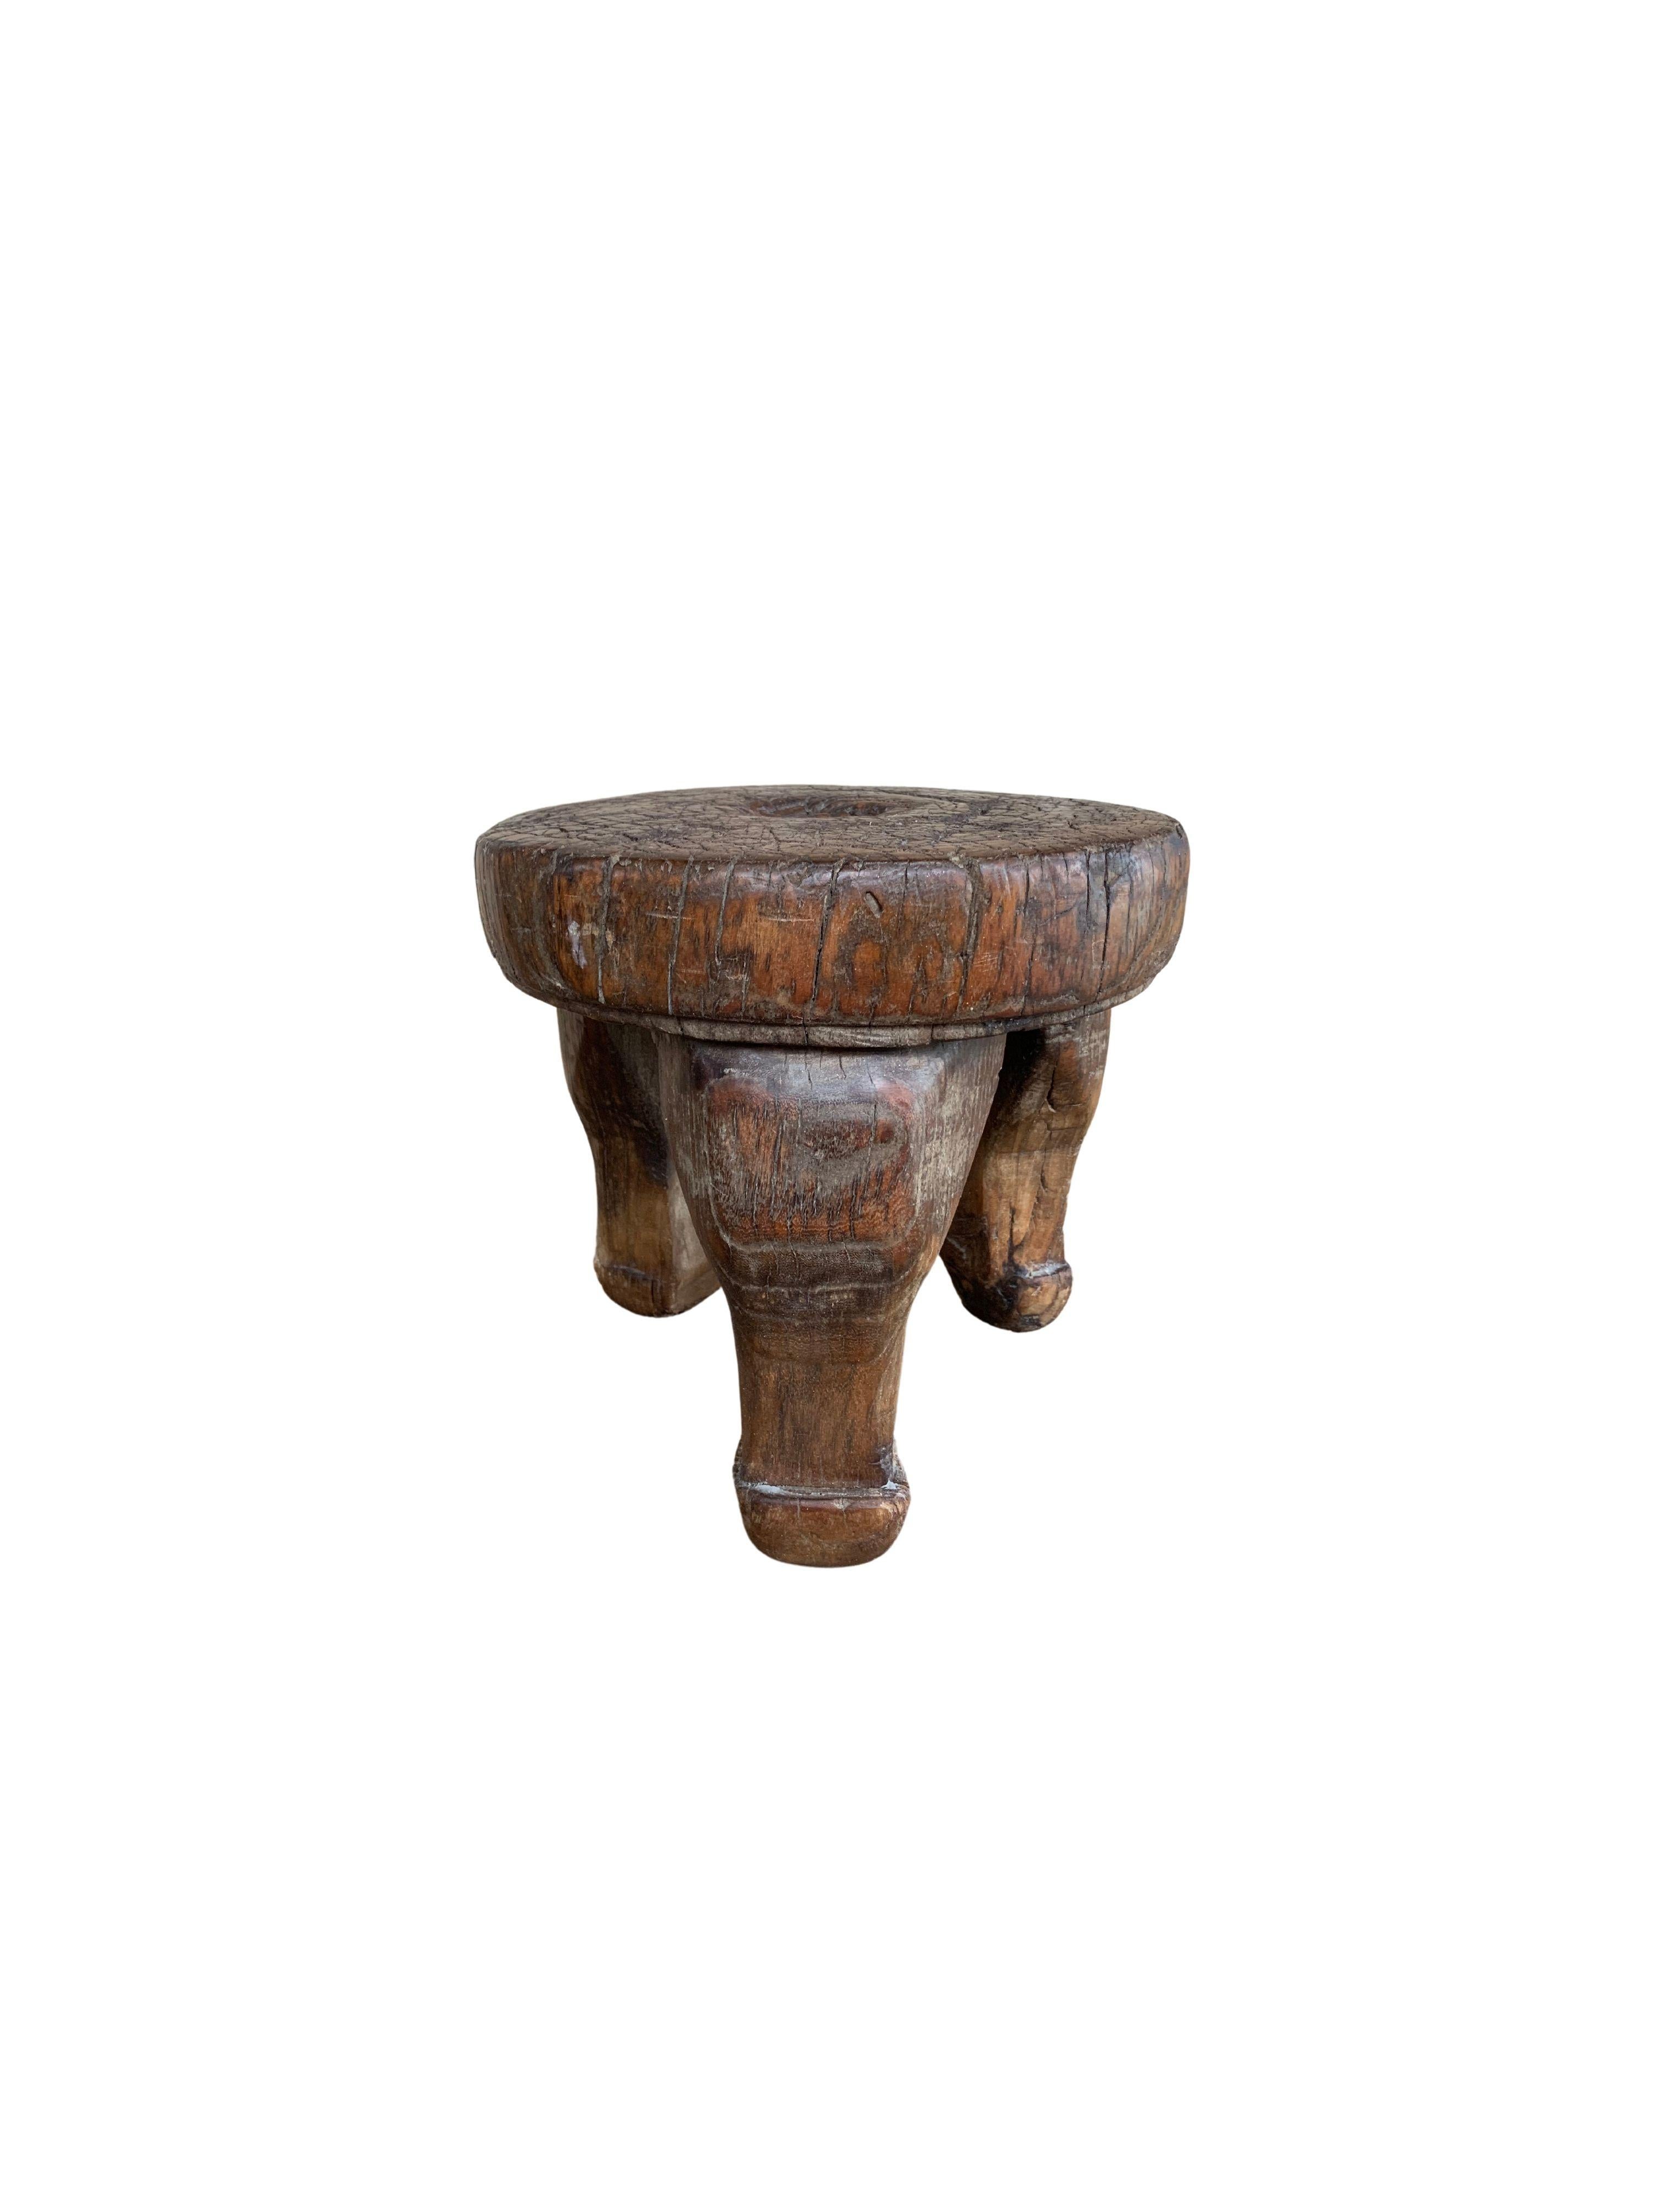 Hand-Crafted Antique Chinese Rustic Mini Elm Wood 3 Legged Stool, c.1900